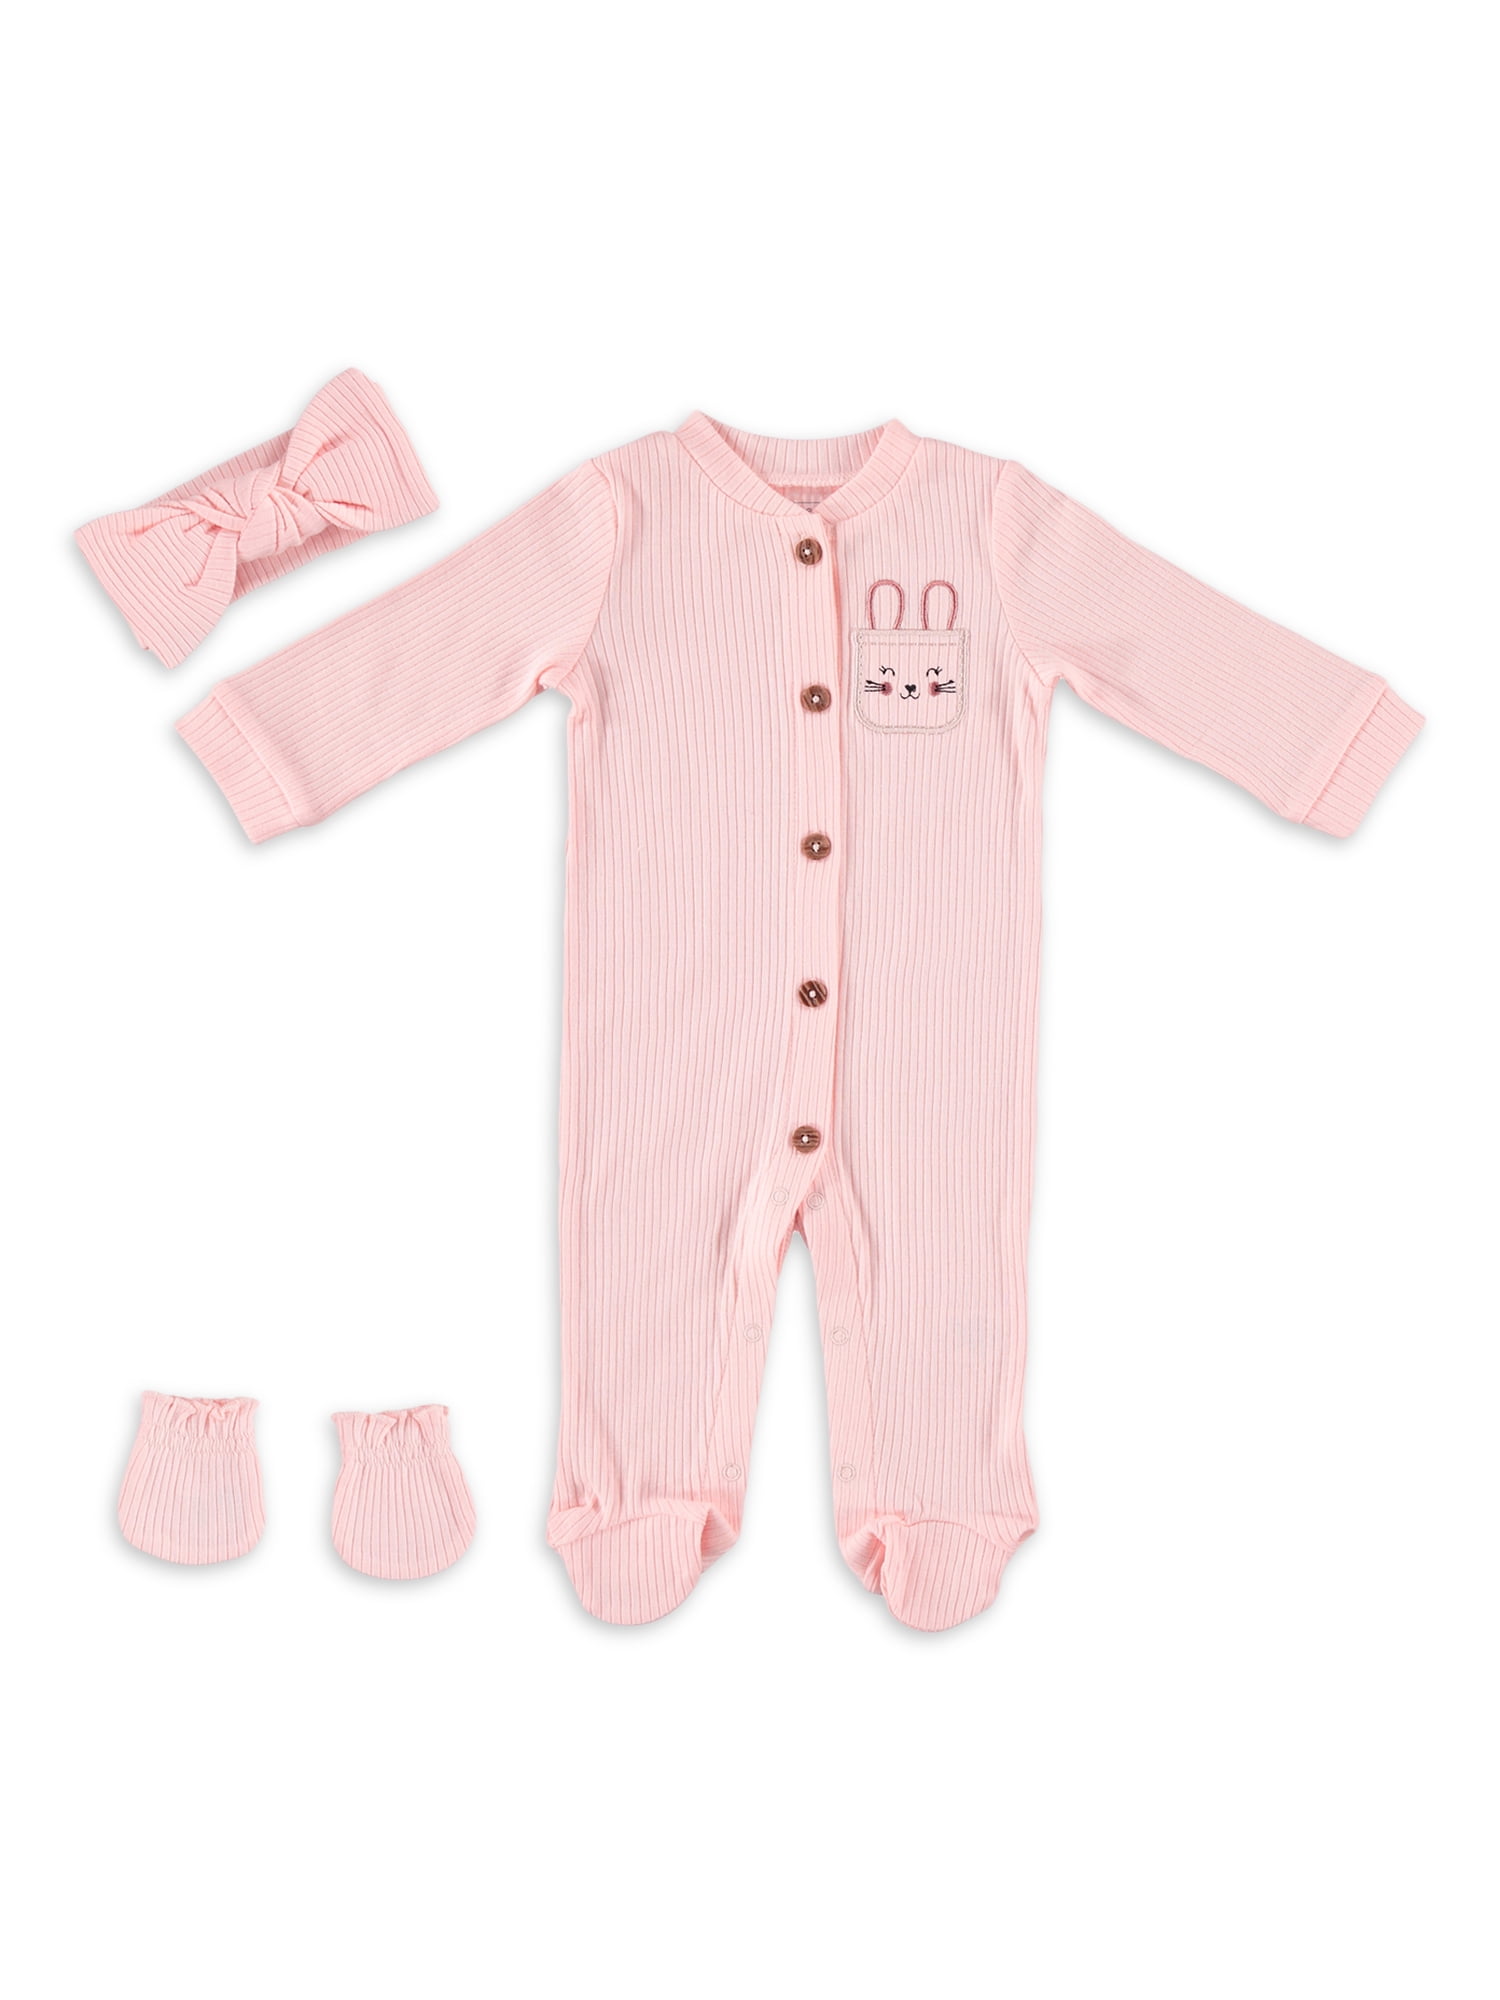 Nanette Lepore Baby Girl Quilted Coverall Footie Size 3 6 9 Months Blush Pink 